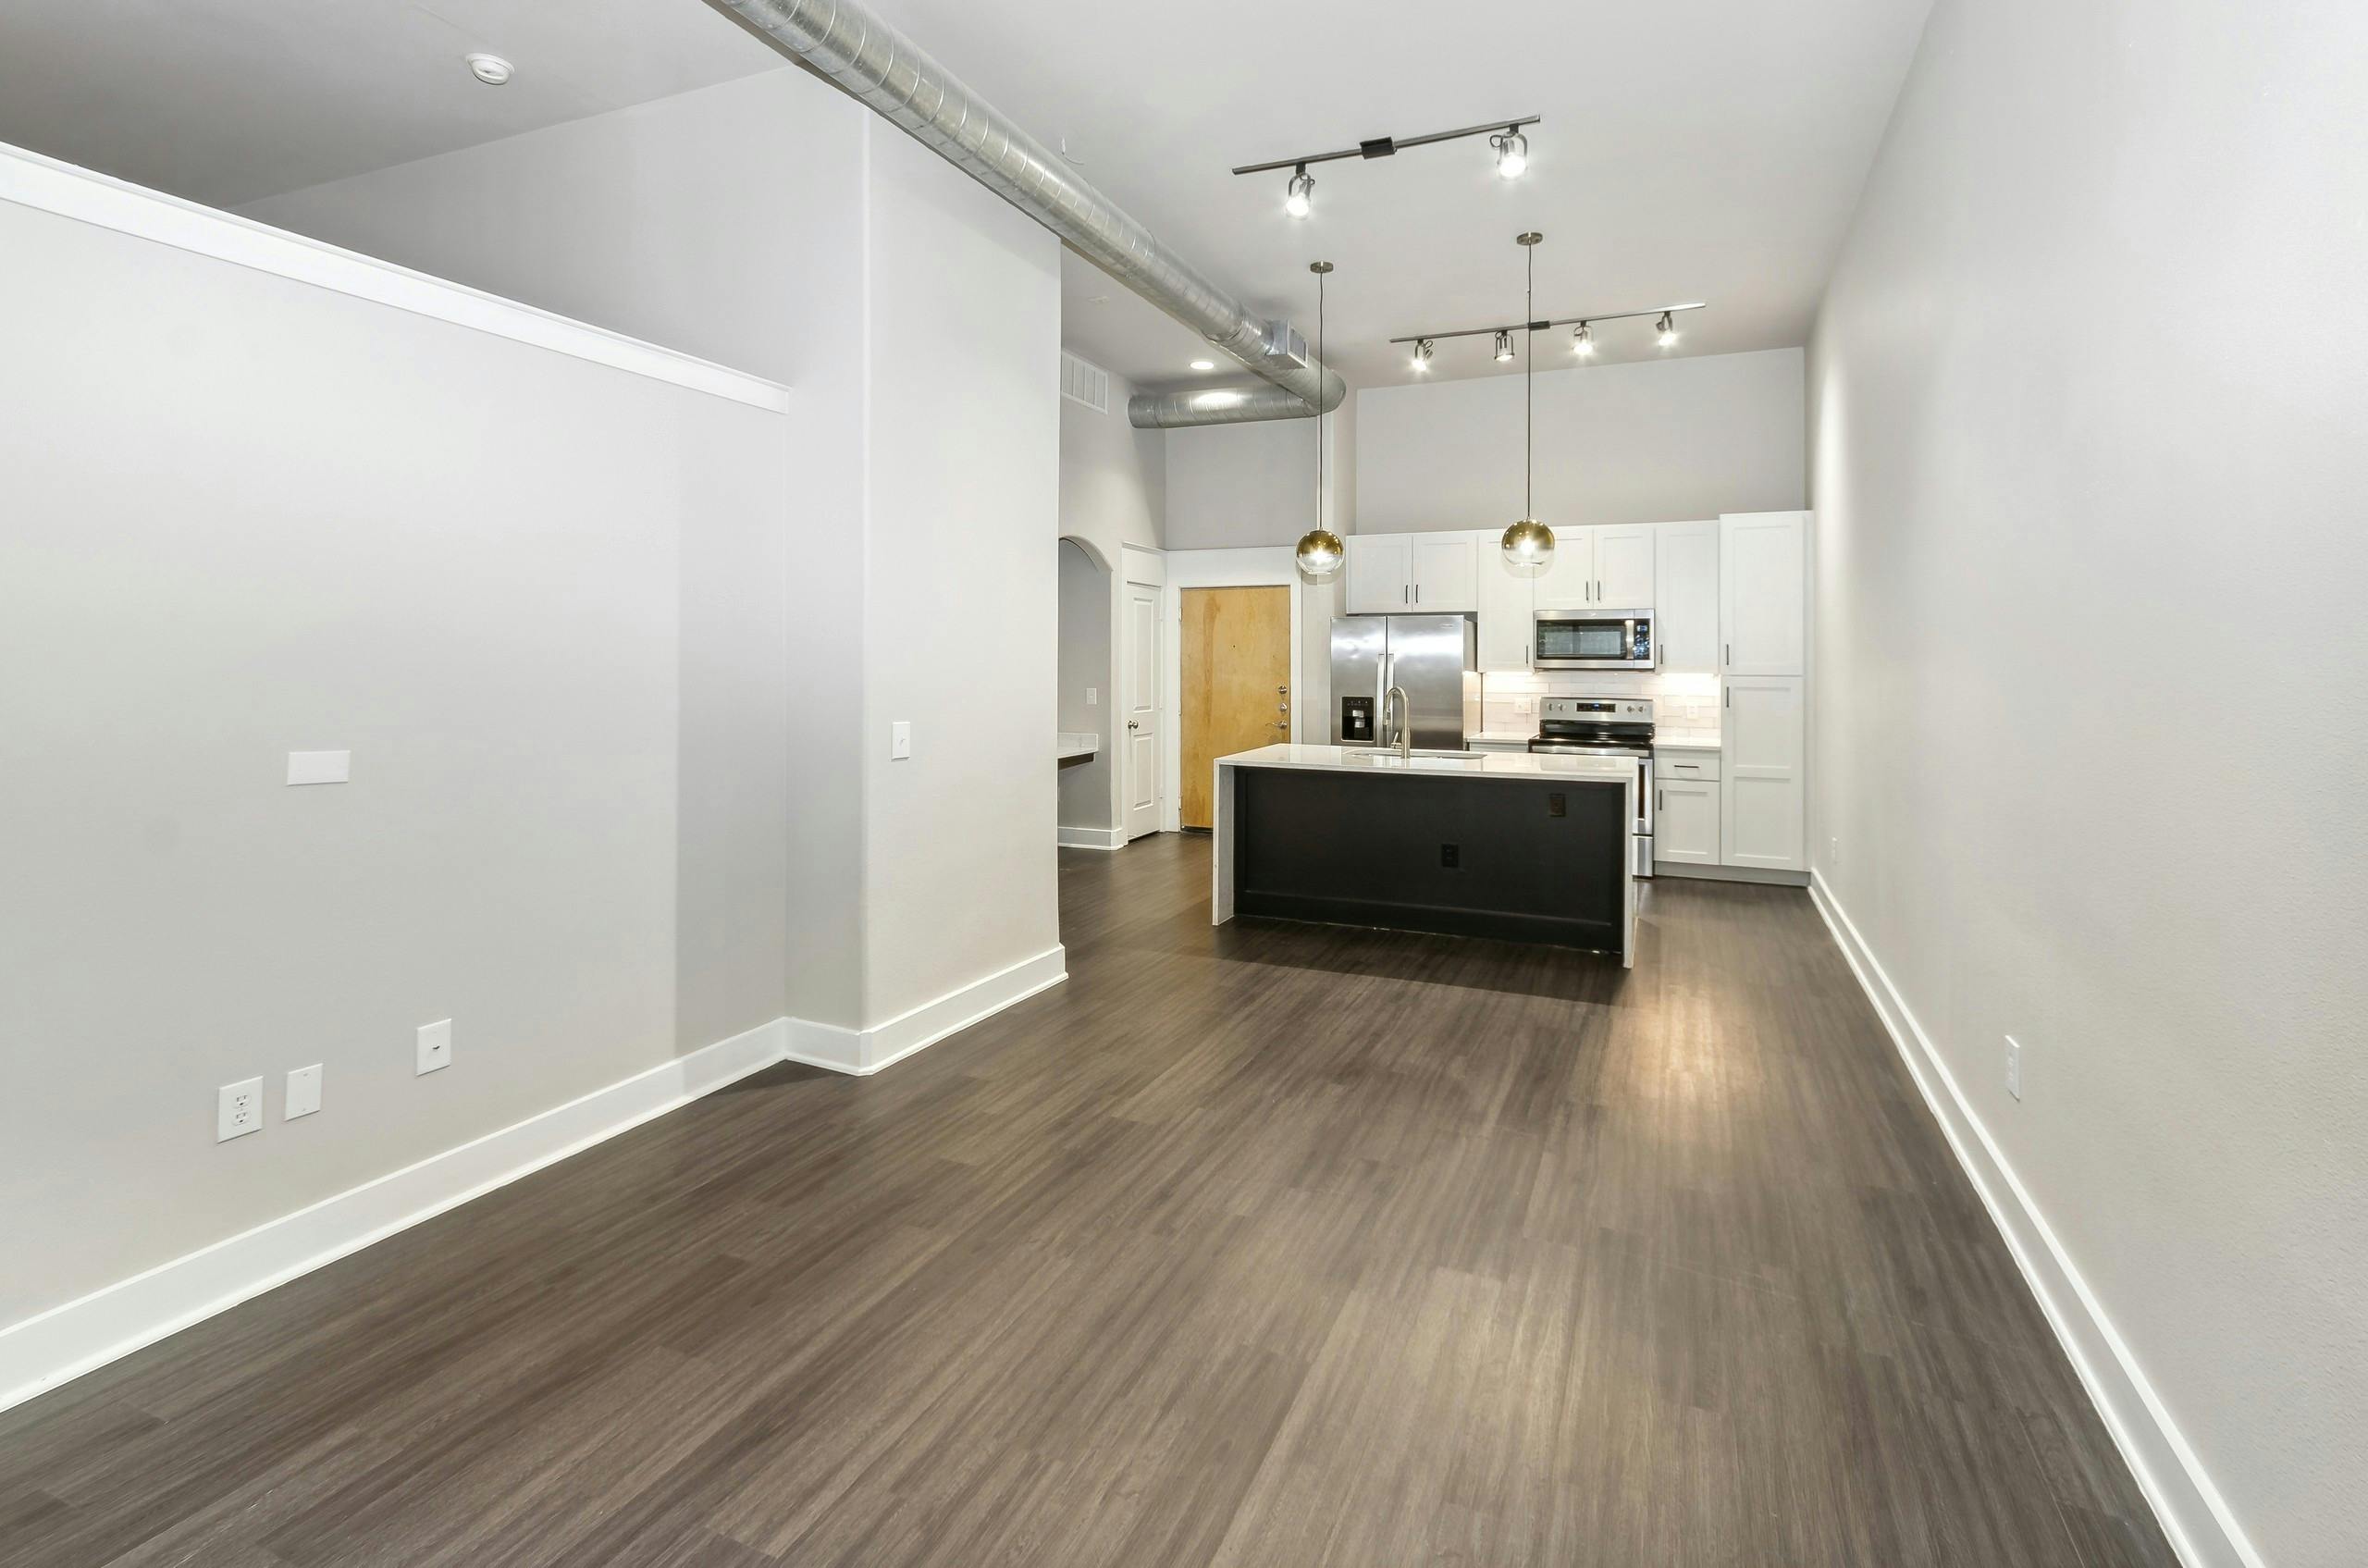 Living room and kitchen of remodeled AMLI Las Colinas apartment with white countertops and wood flooring